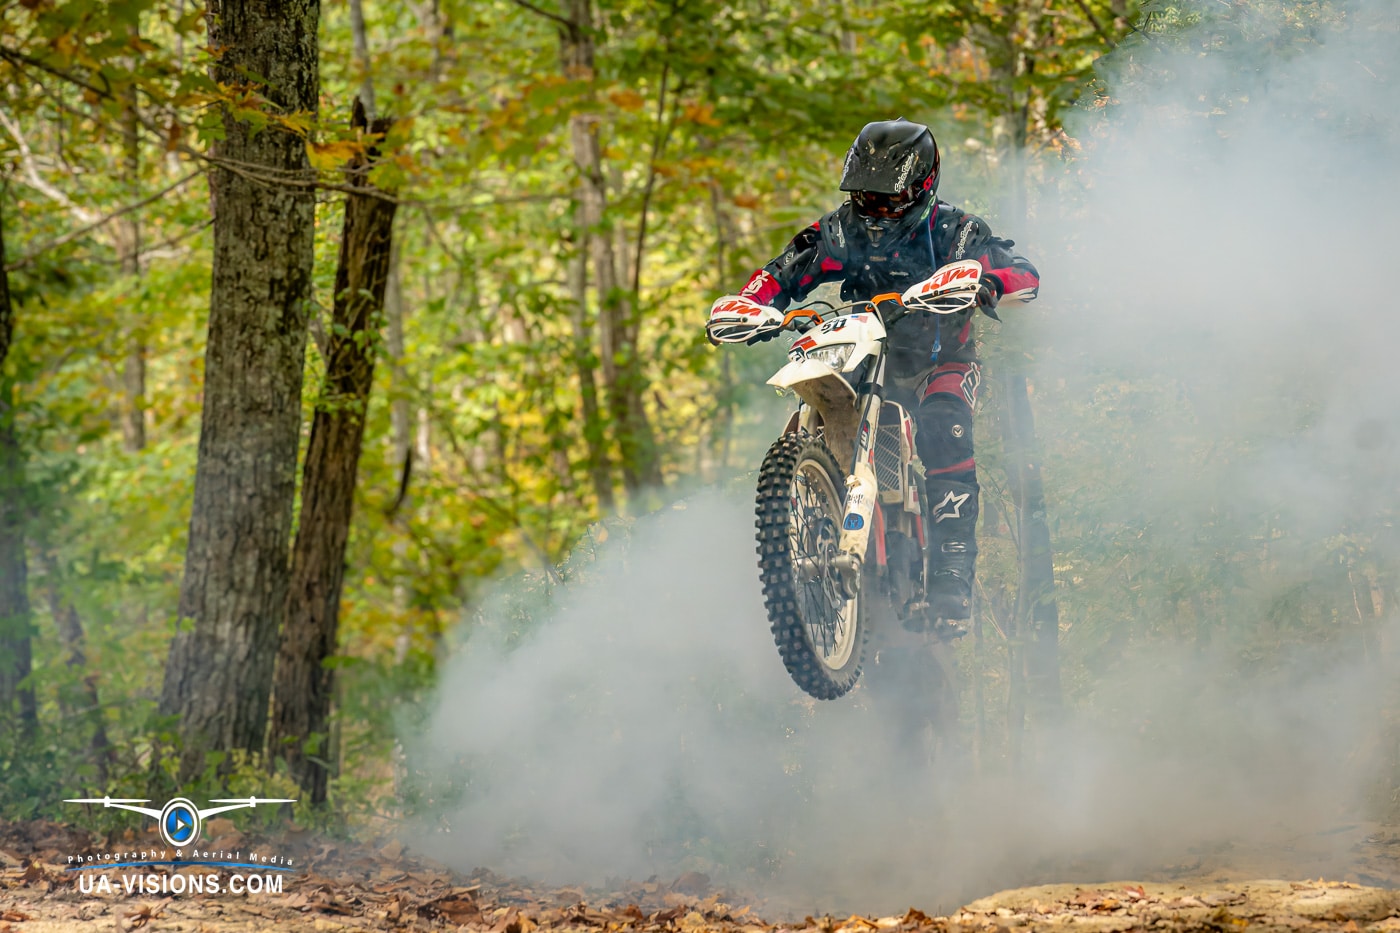 Motocross rider traversing a dusty trail amidst the dense forests of West Virginia.